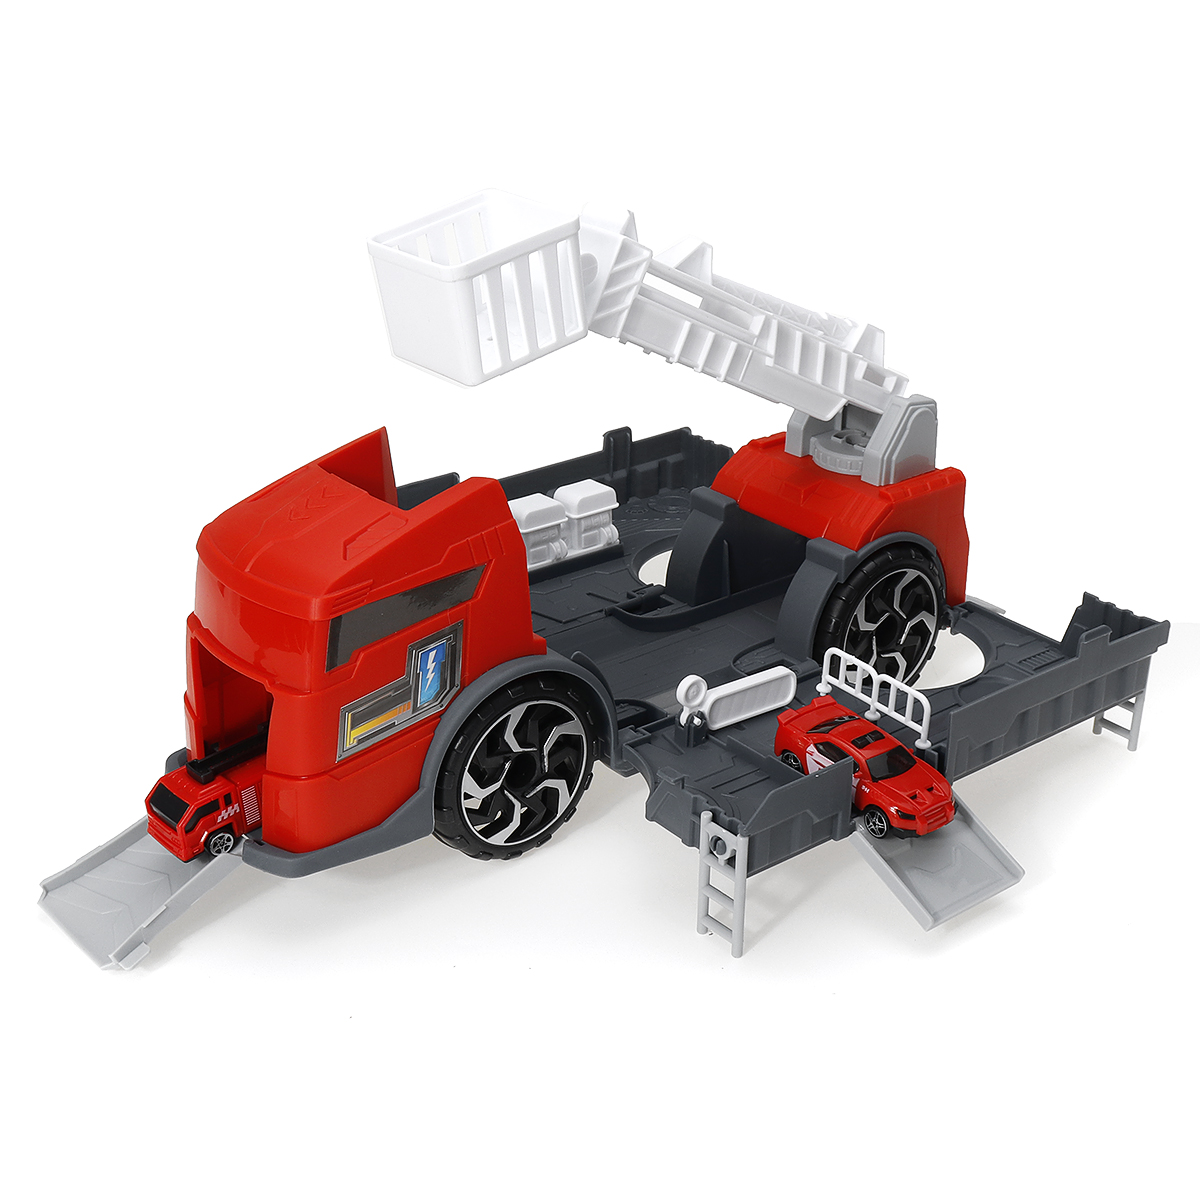 1:24 Scale Truck Car Model Car Engineering Trailer Loader Truck Car Kids Toy Birthday/Holiday Gifts - image 5 of 12